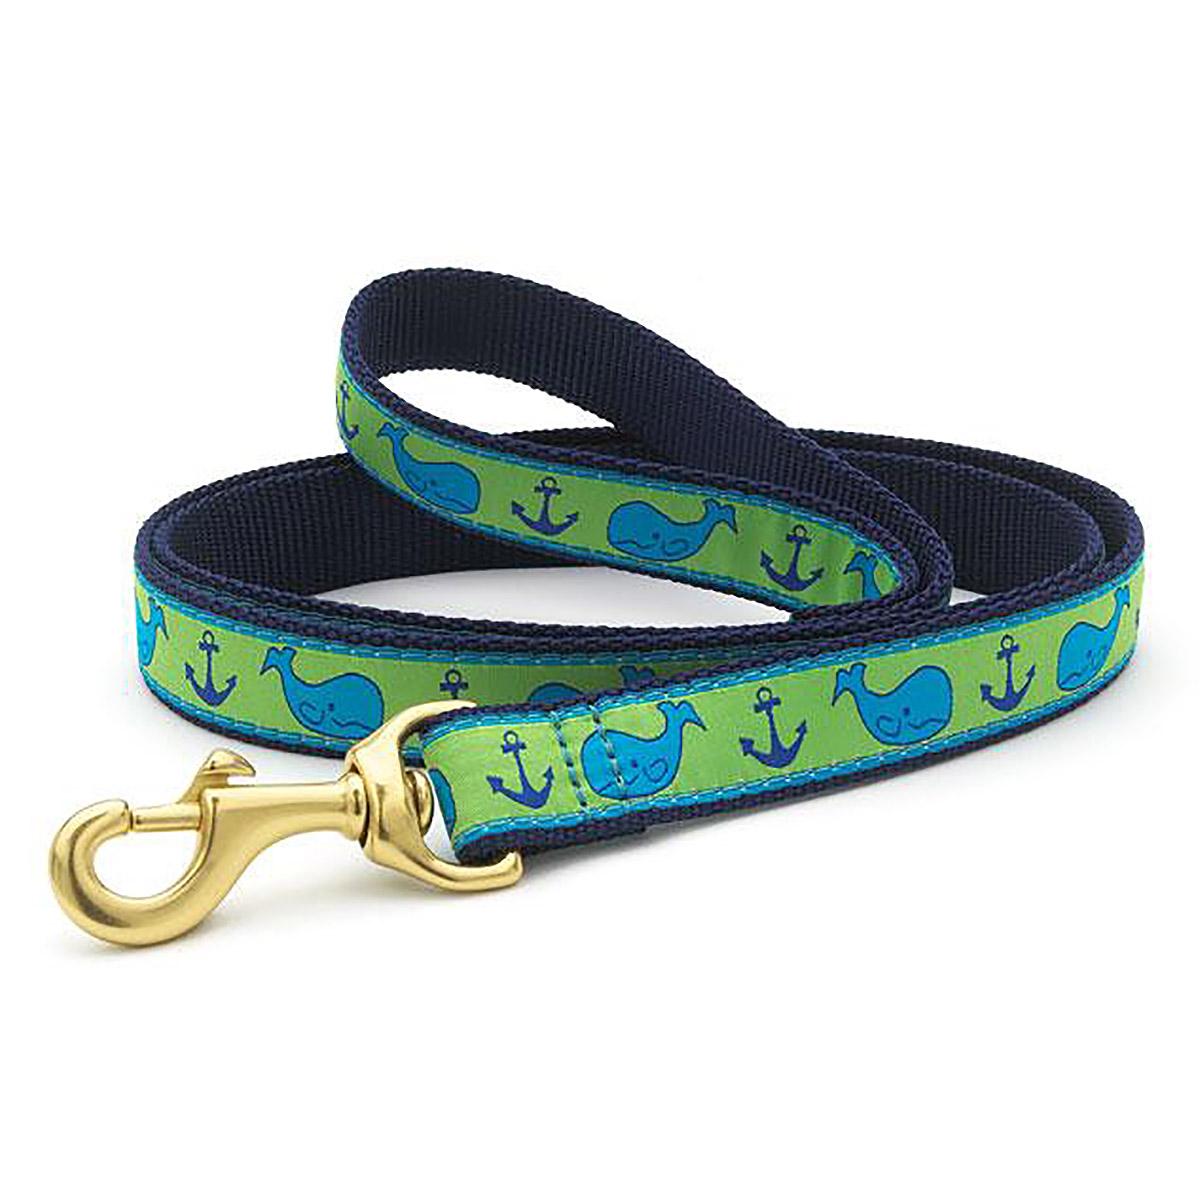 Whale Dog Leash by Up Country